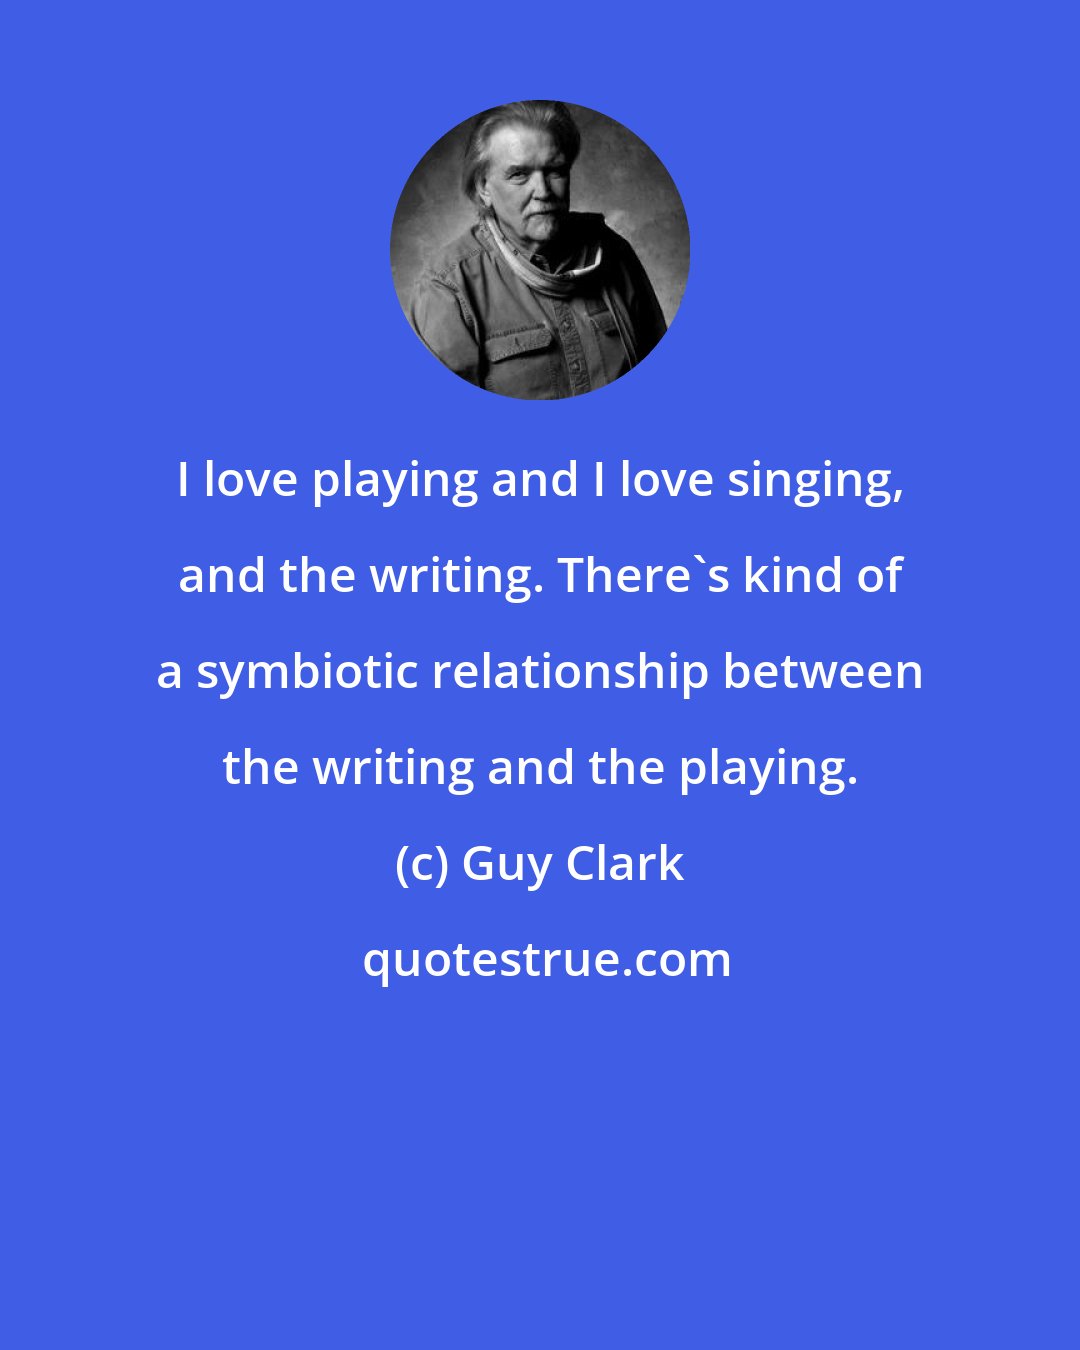 Guy Clark: I love playing and I love singing, and the writing. There's kind of a symbiotic relationship between the writing and the playing.